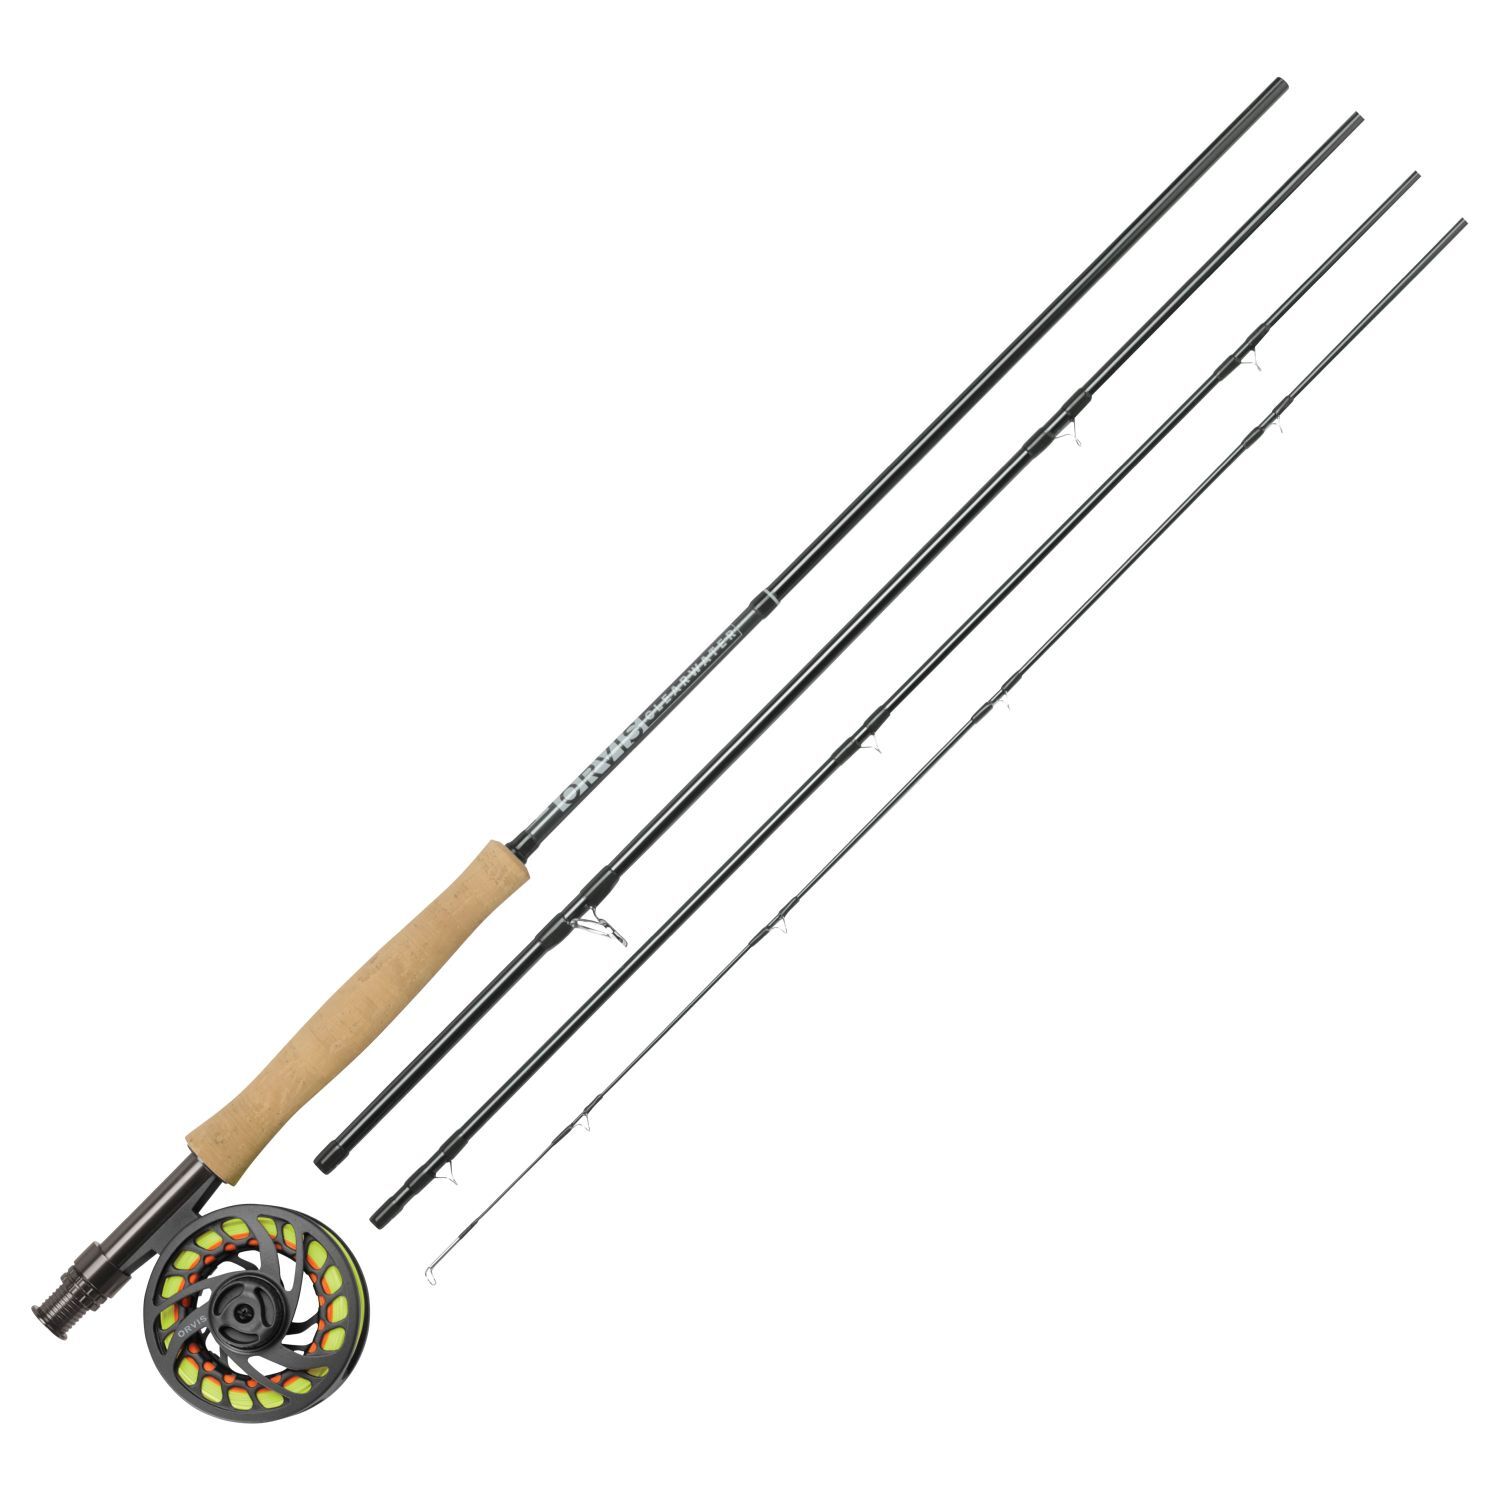 ORVIS Clearwater Fly Rod Outfit online bobleisure - Canada